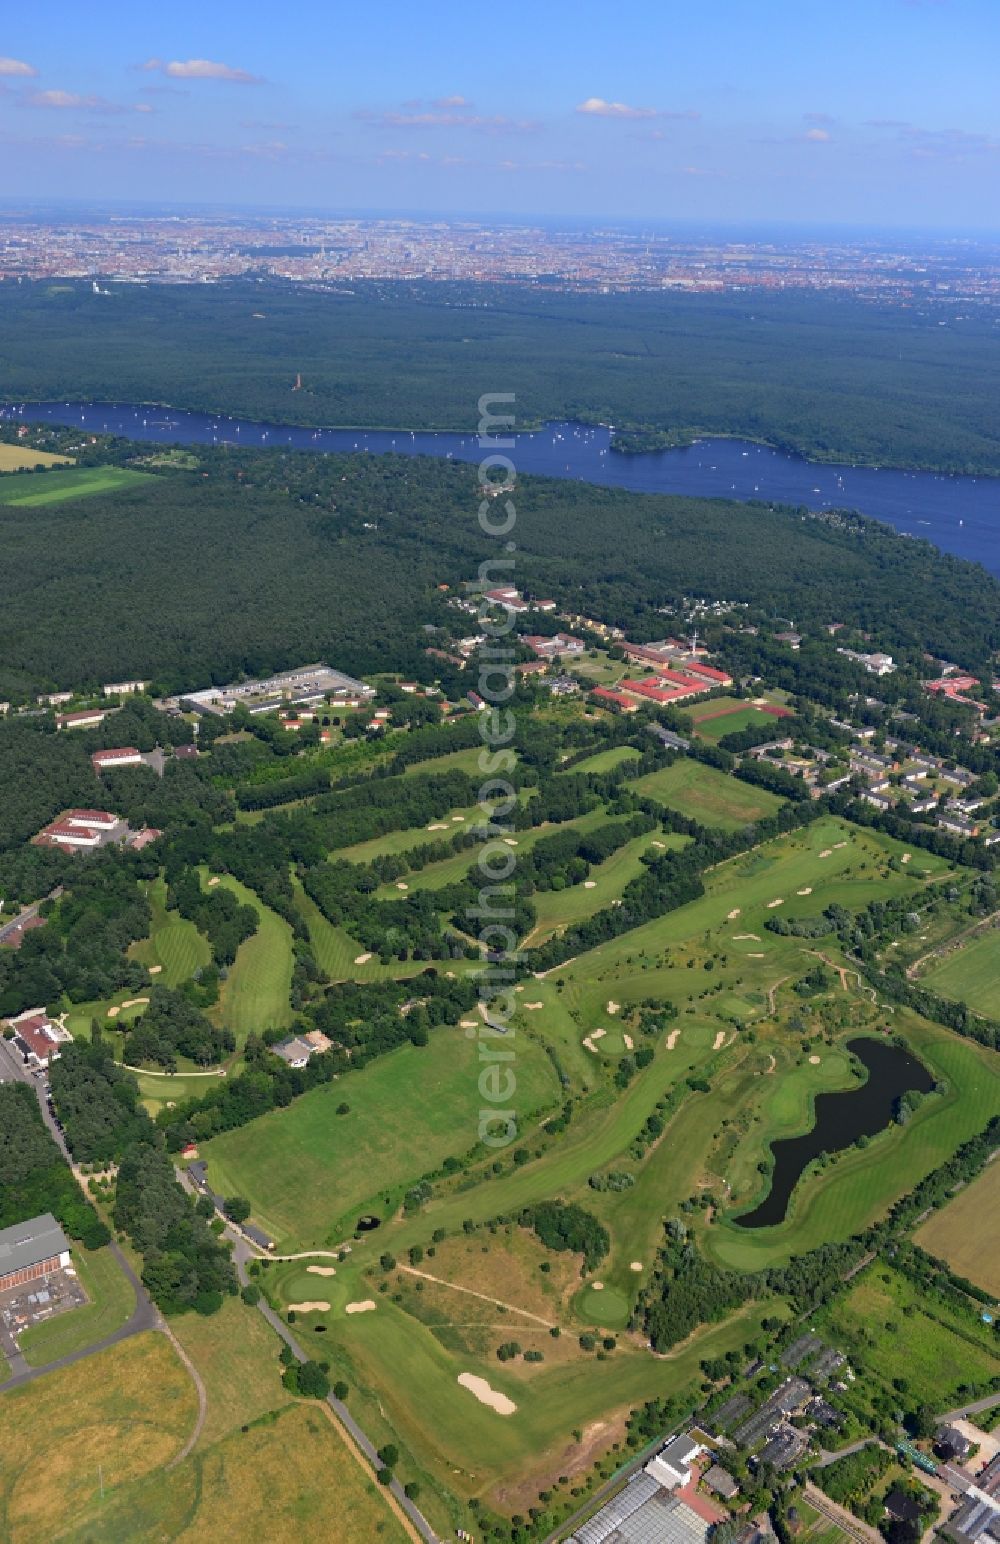 Berlin from above - Landscape along the golf course of the Berliner Golf Club Gatow eV on the shores of the Wannsee district of Berlin Gatow